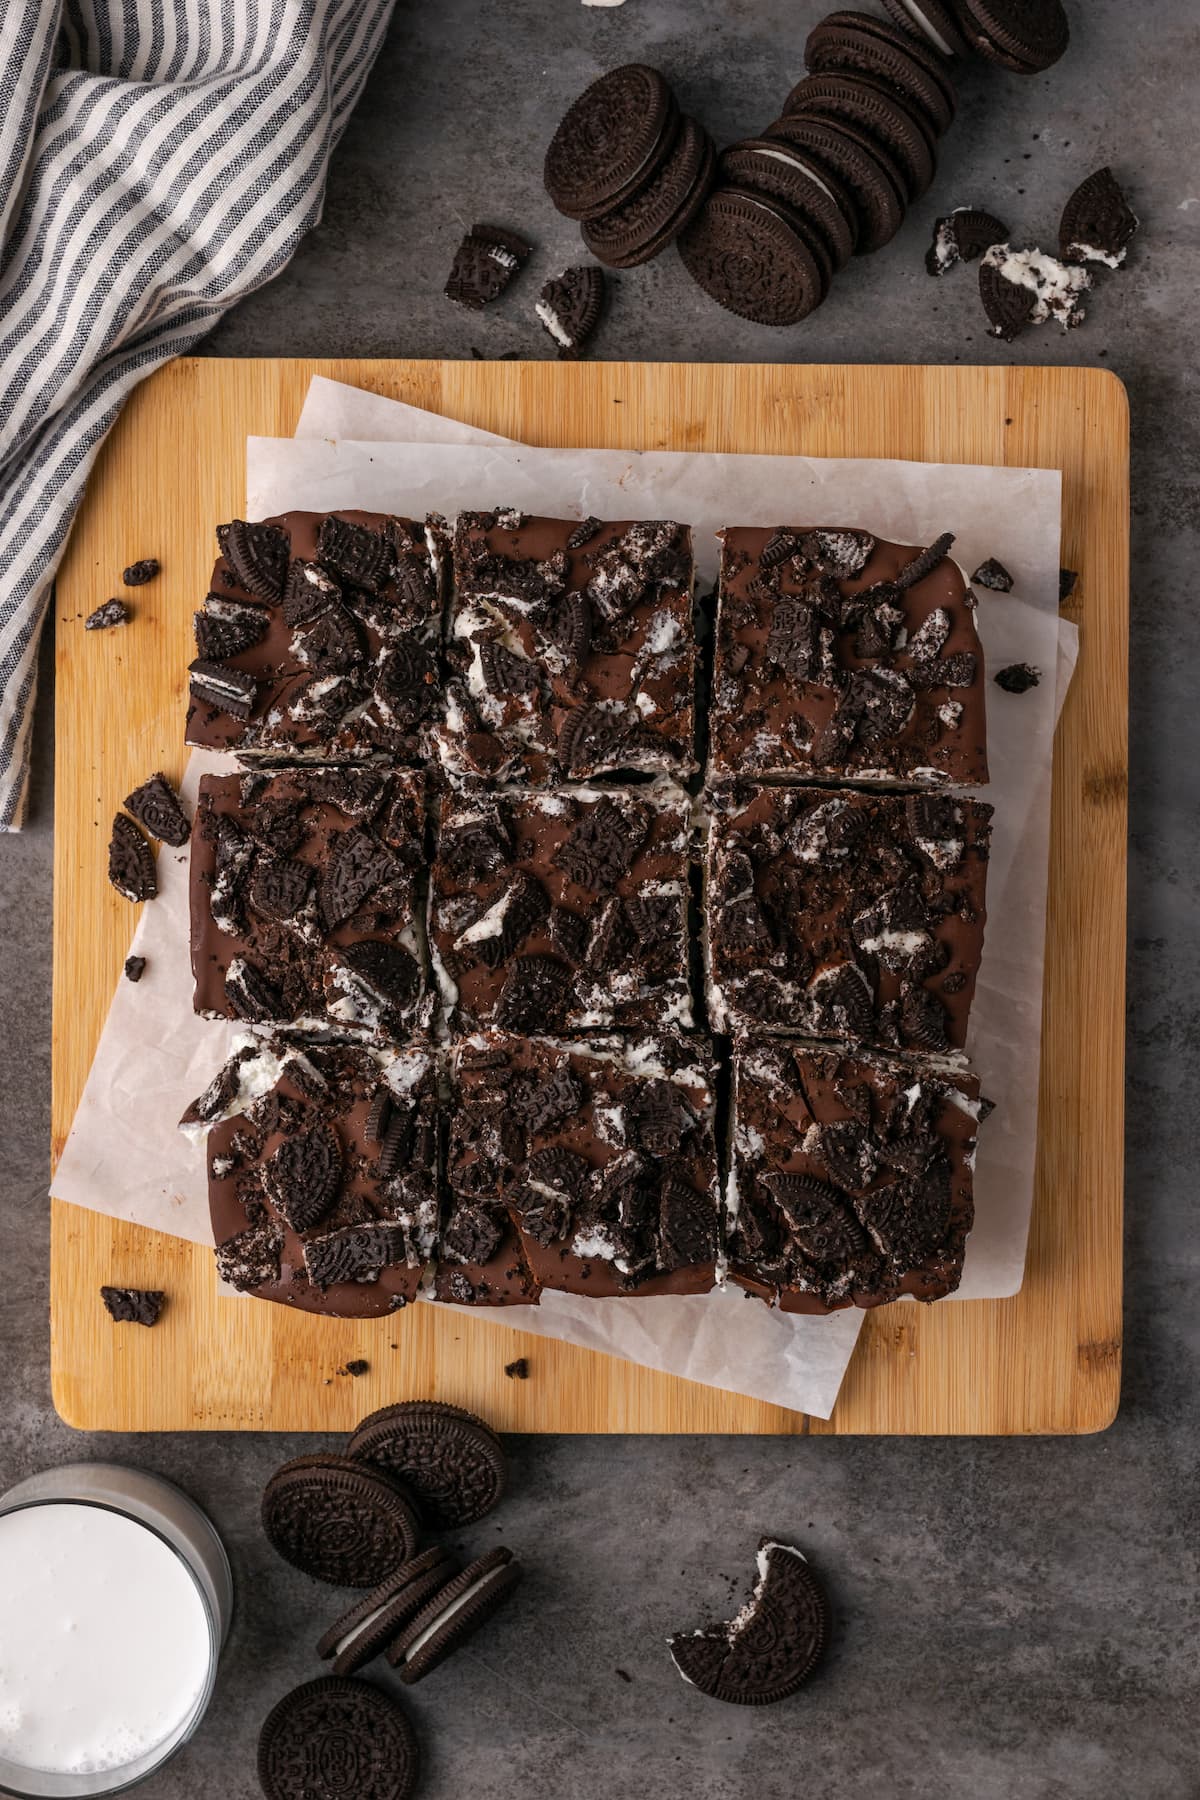 Overhead view of Oreo brownies cut into squares on a wooden cutting board.